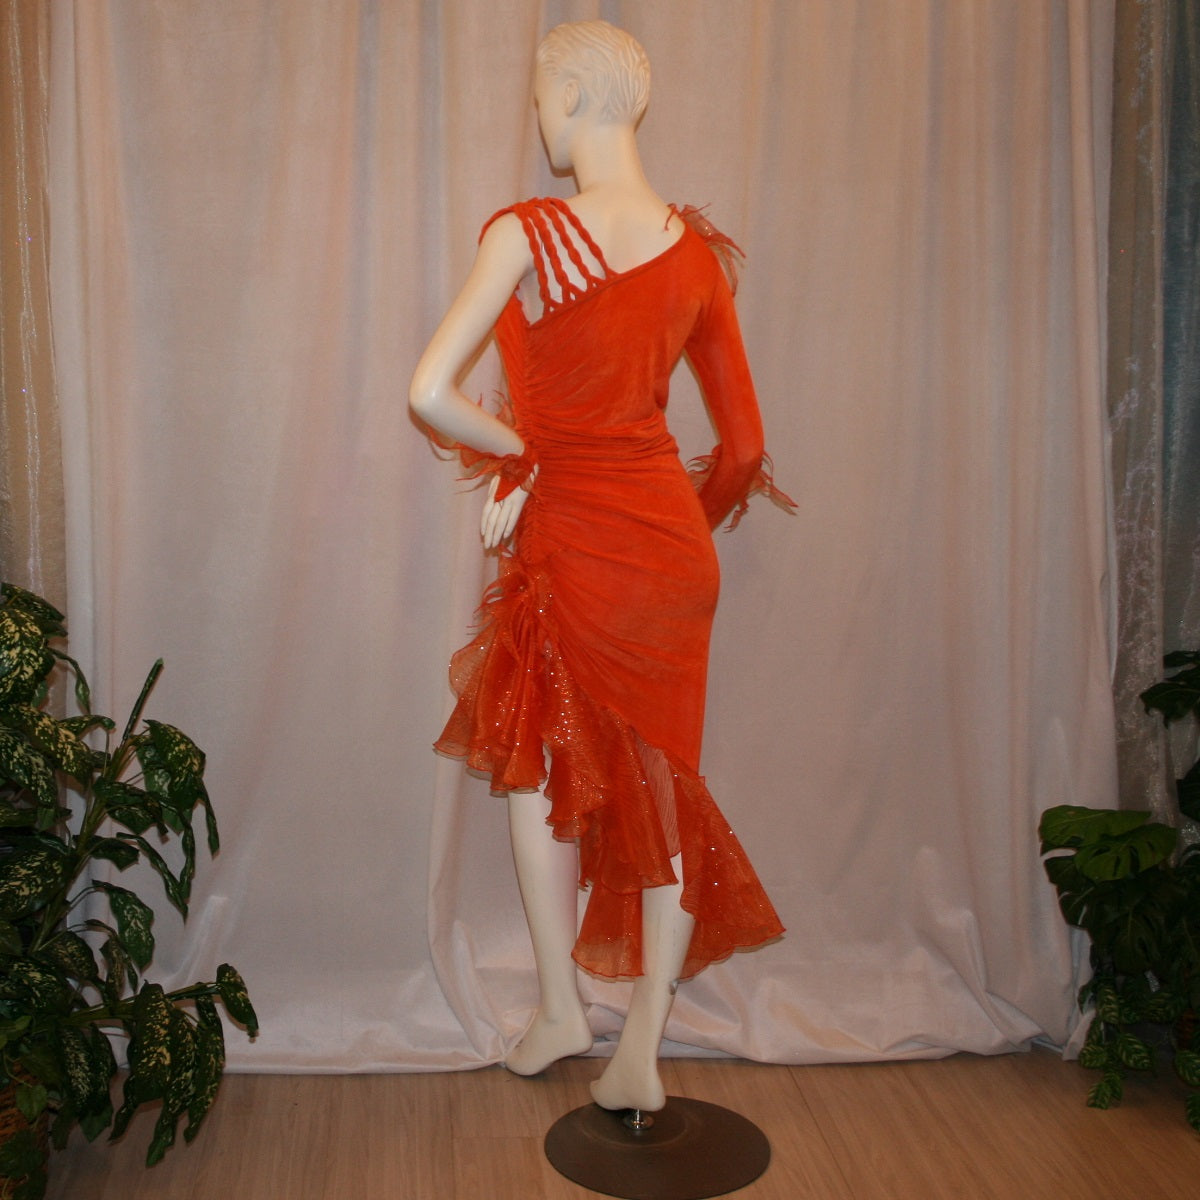 Crystal's Creations back view of Orange Latin/rhythm dress was created in luxurious orange solid slinky with oodles of glitter organza flounces & accents, embellished with a touch of Swarovski hand beading.